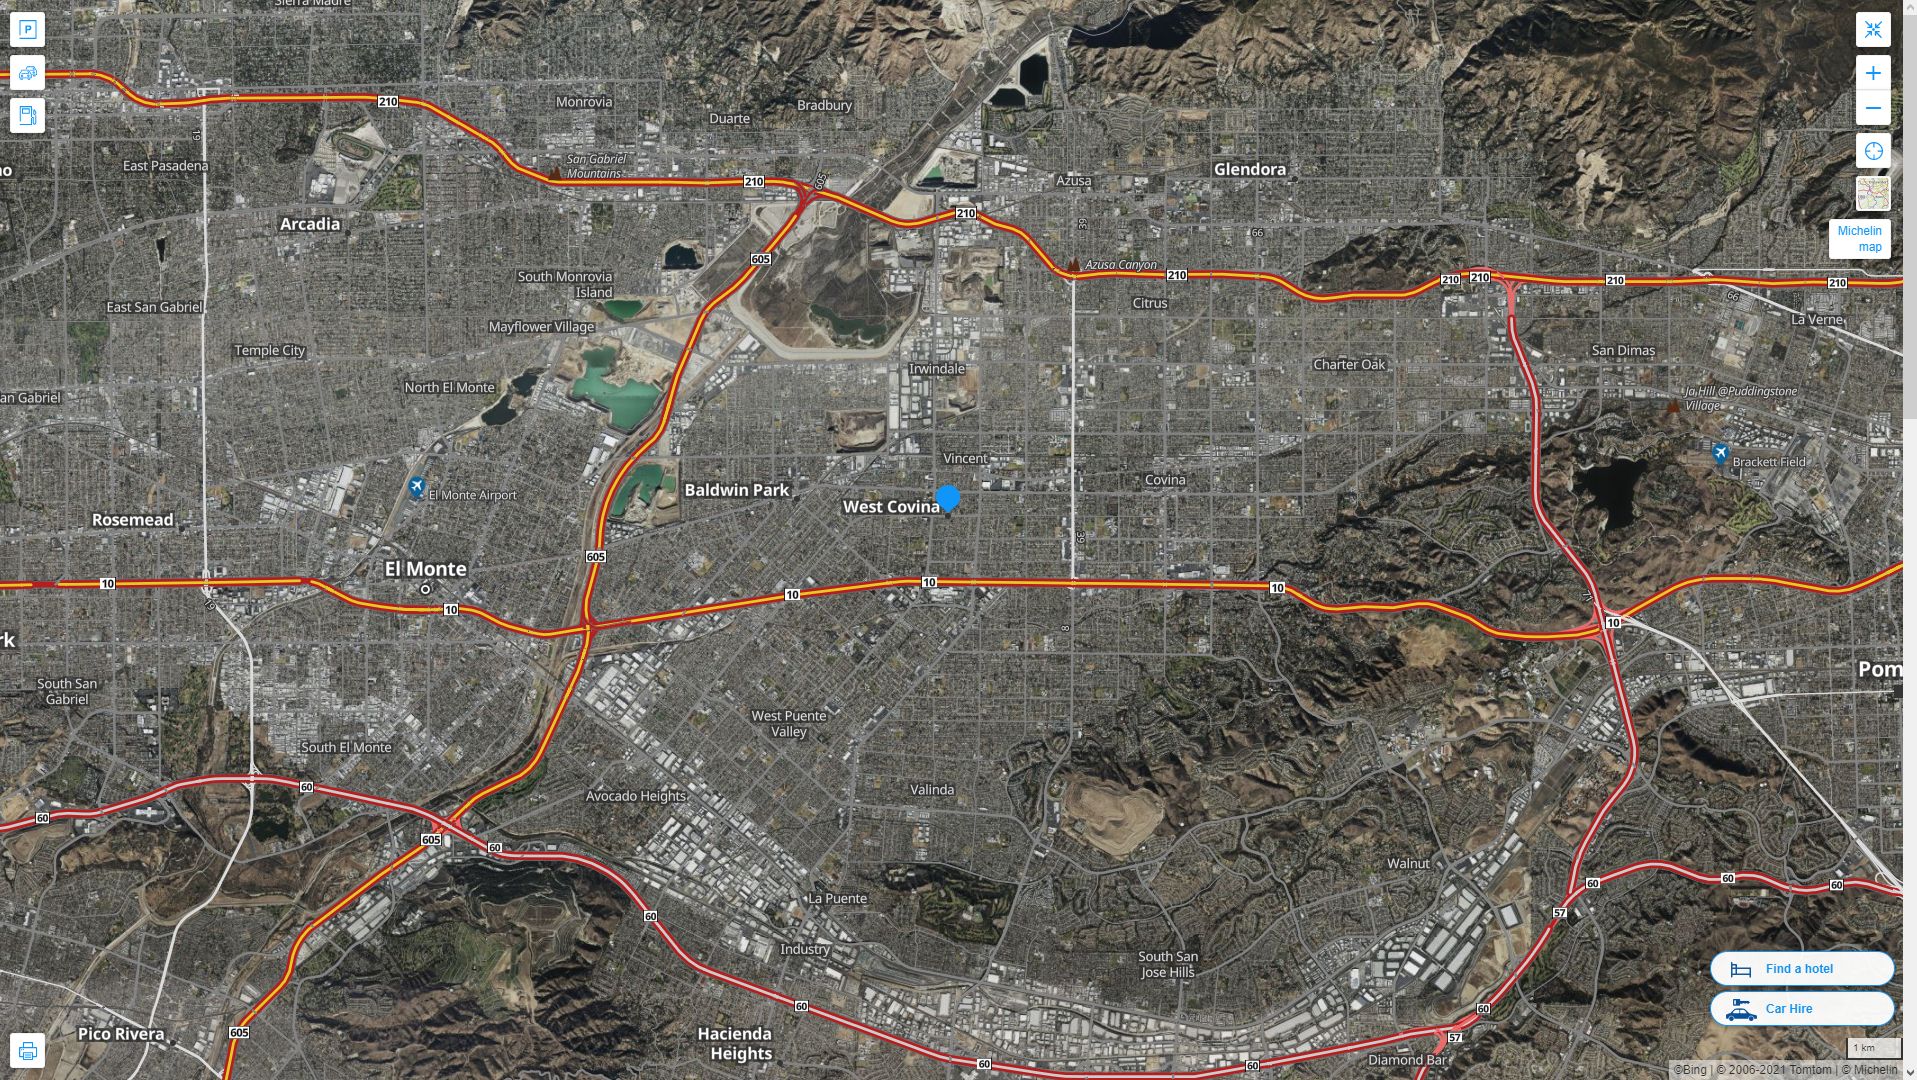 West Covina California Highway and Road Map with Satellite View